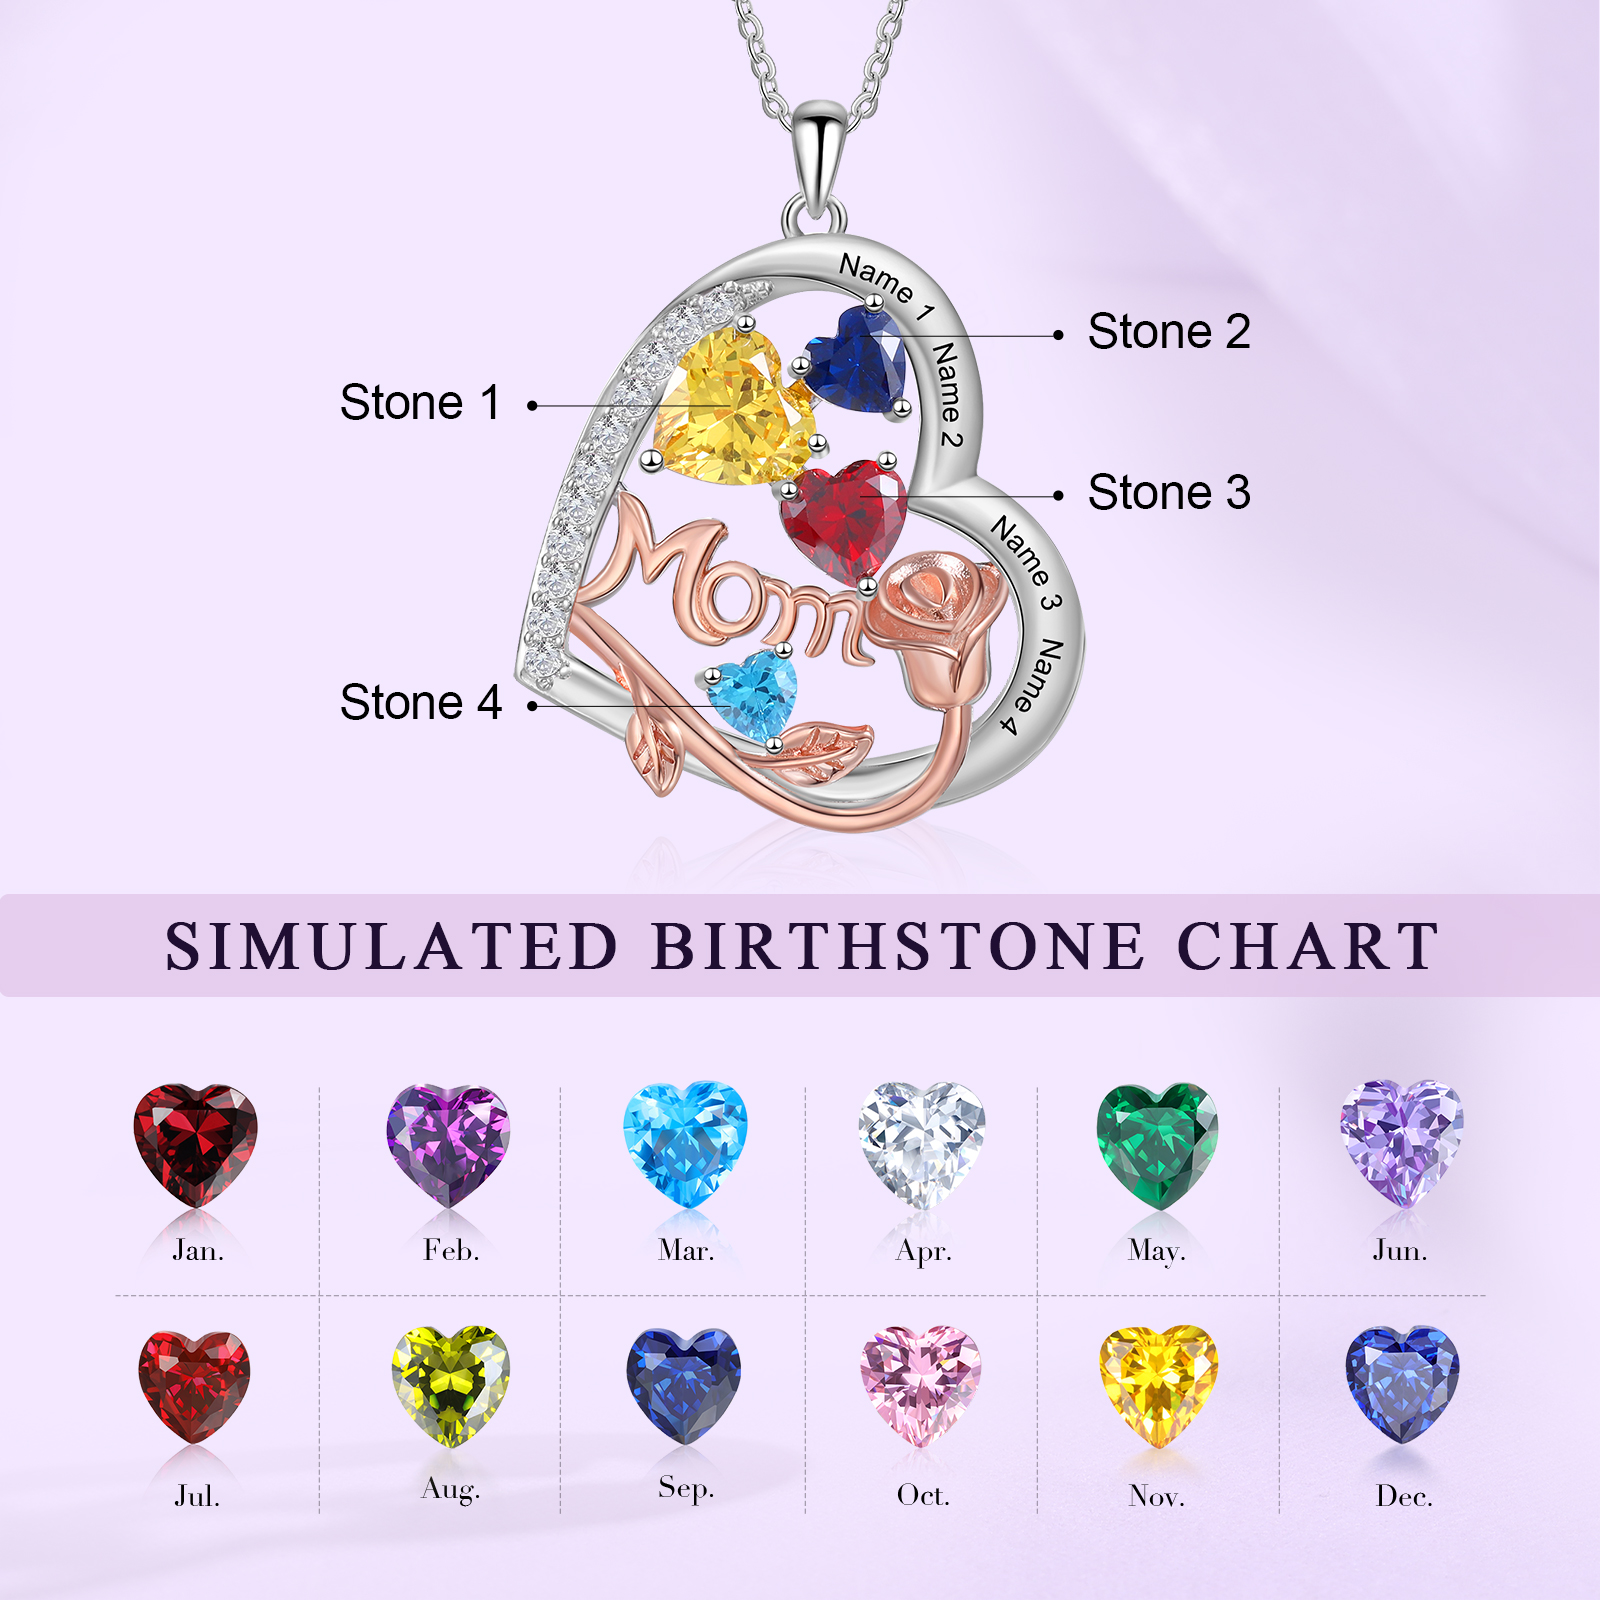 4 Names - Personalized Silver Heart Necklace with Birthstone and Name as a Mother's Day Gift for Mom